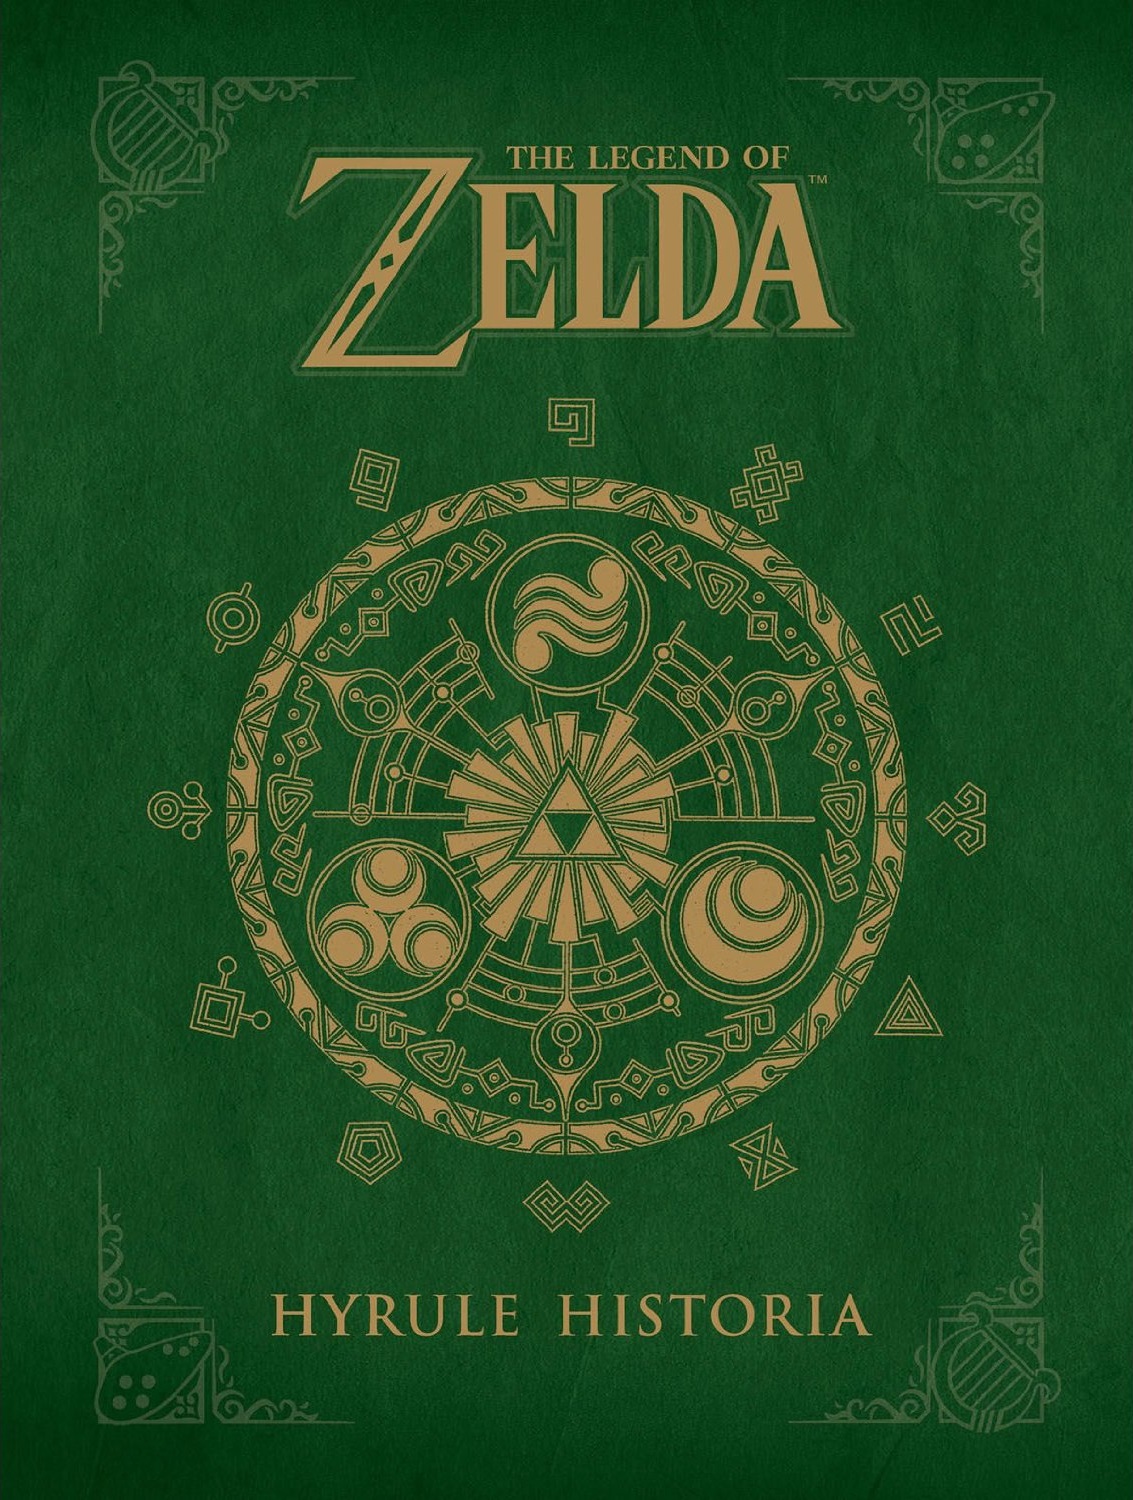 The Legend of Zelda: Majora's Mask / A Link to the Past -Legendary Edition-, Book by Akira Himekawa, Official Publisher Page